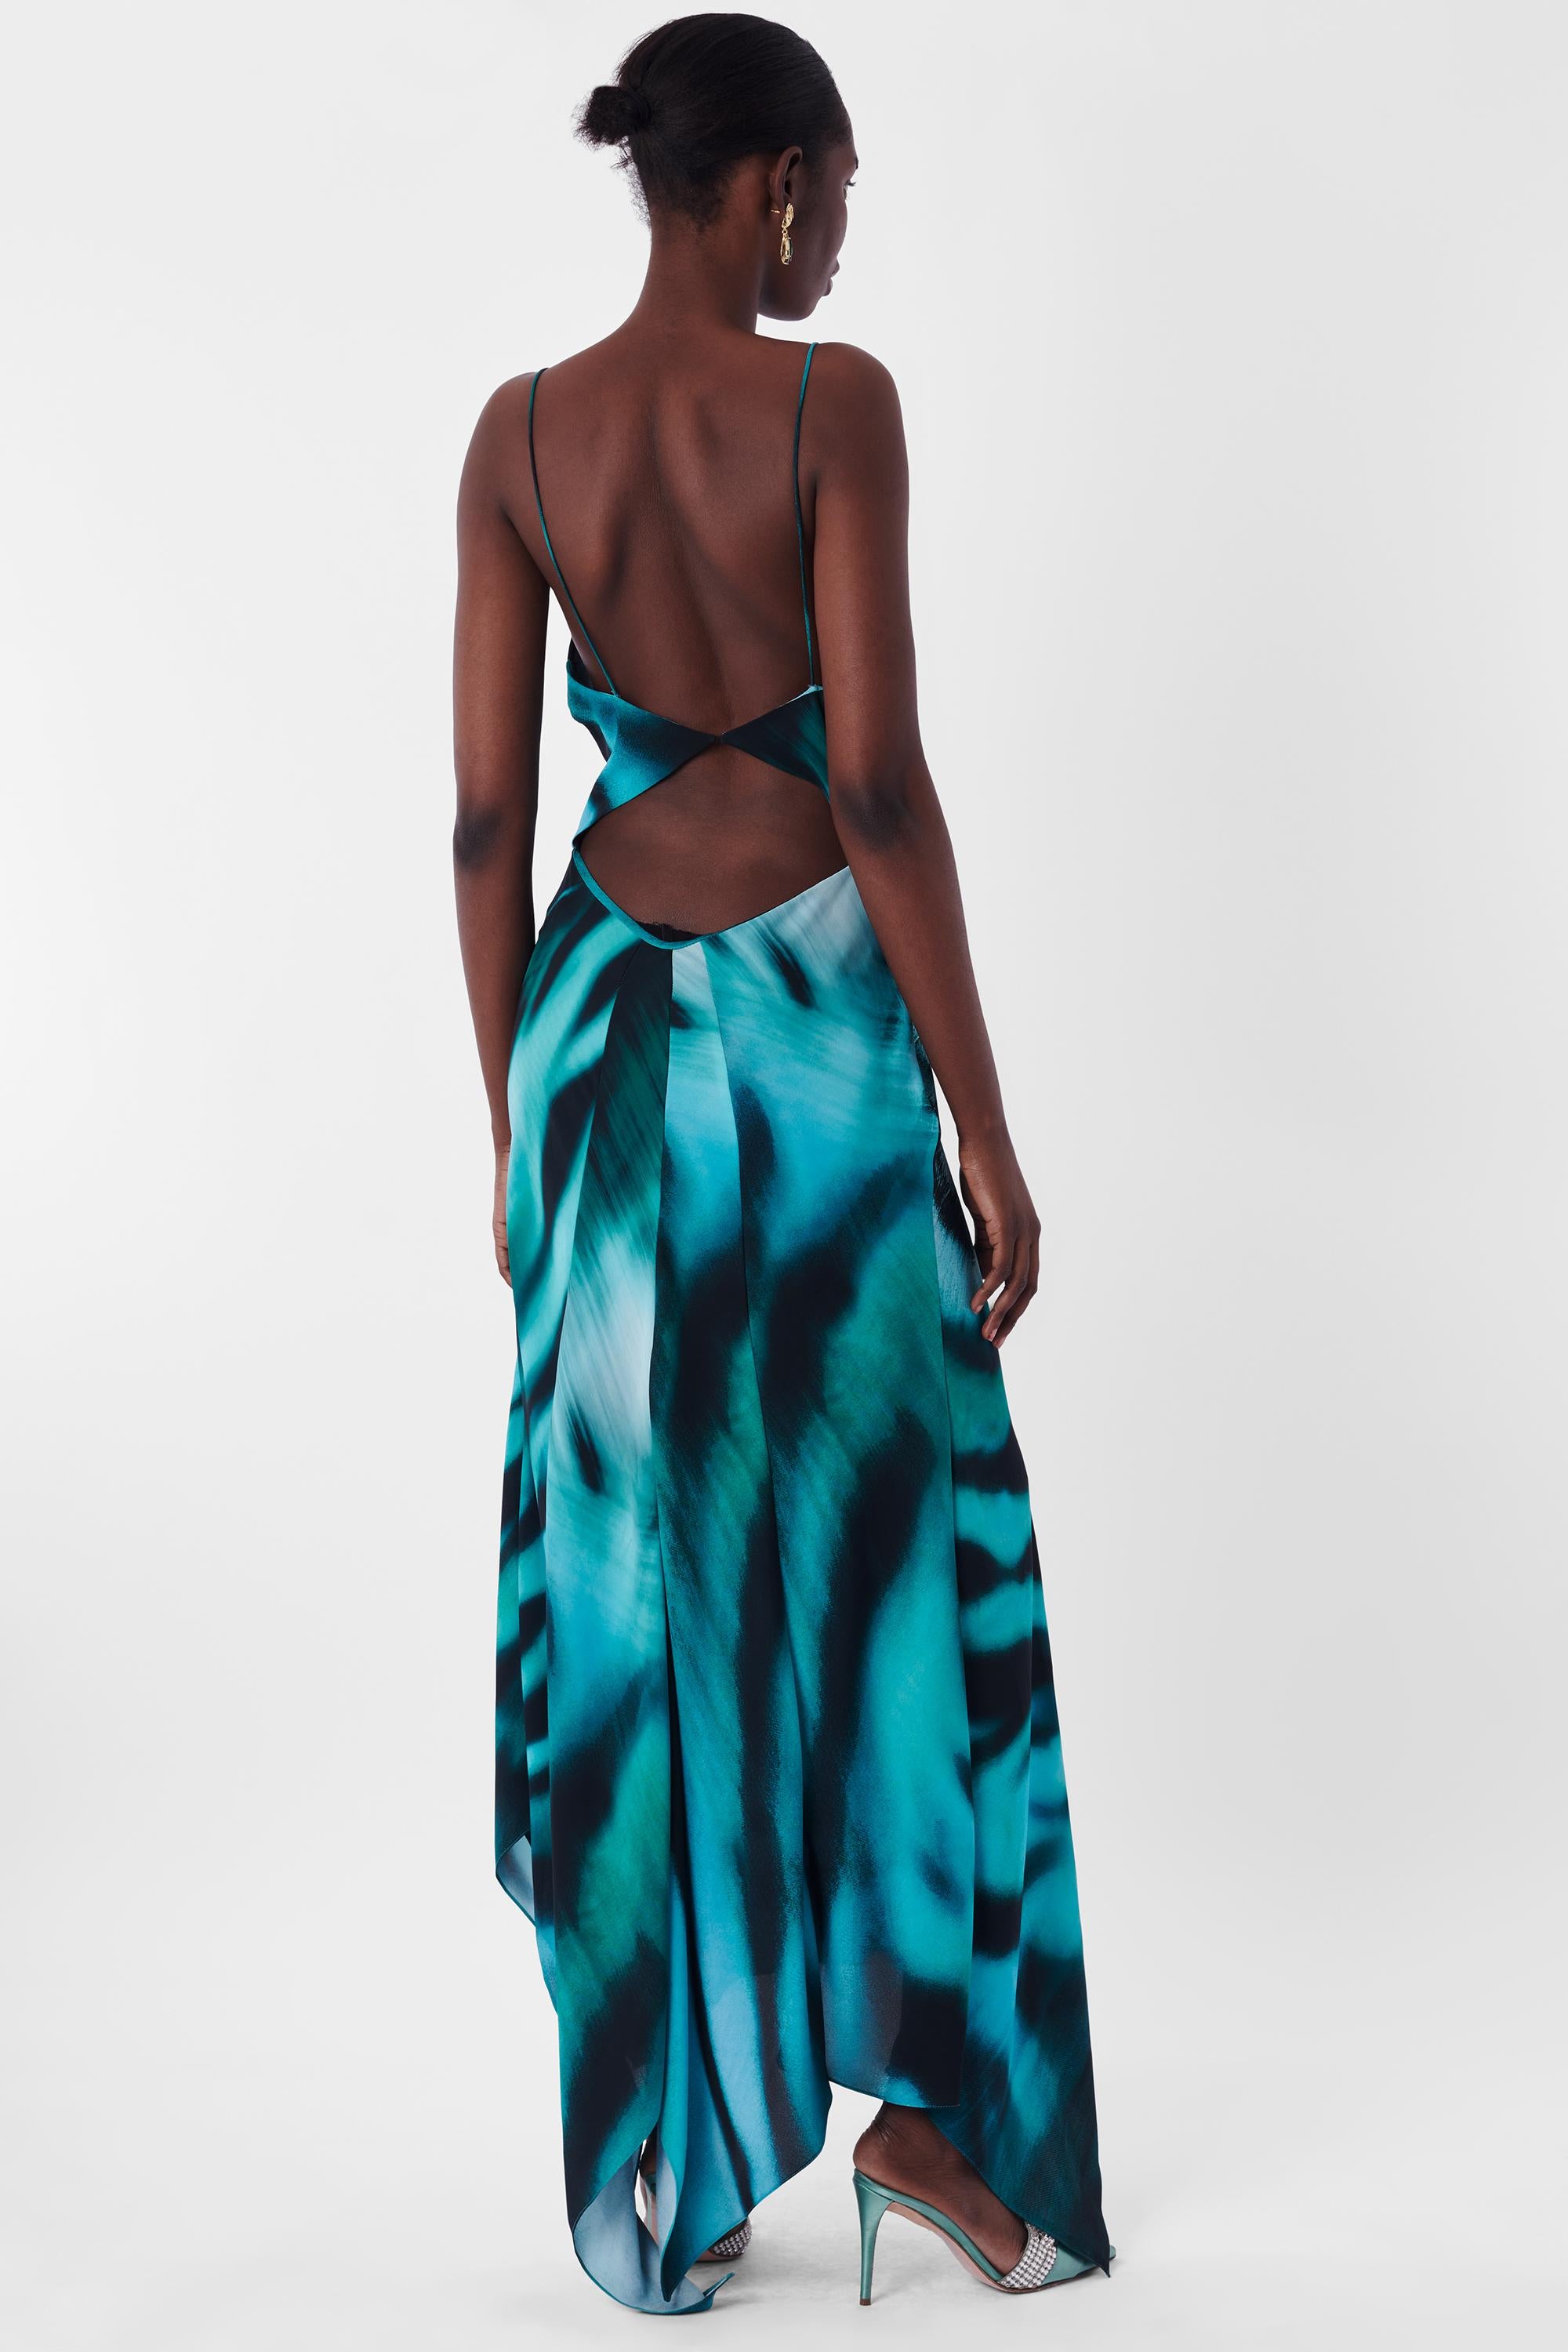 Roberto Cavalli S/S 2022 Blue Tiger Backless Dress In Excellent Condition For Sale In London, GB